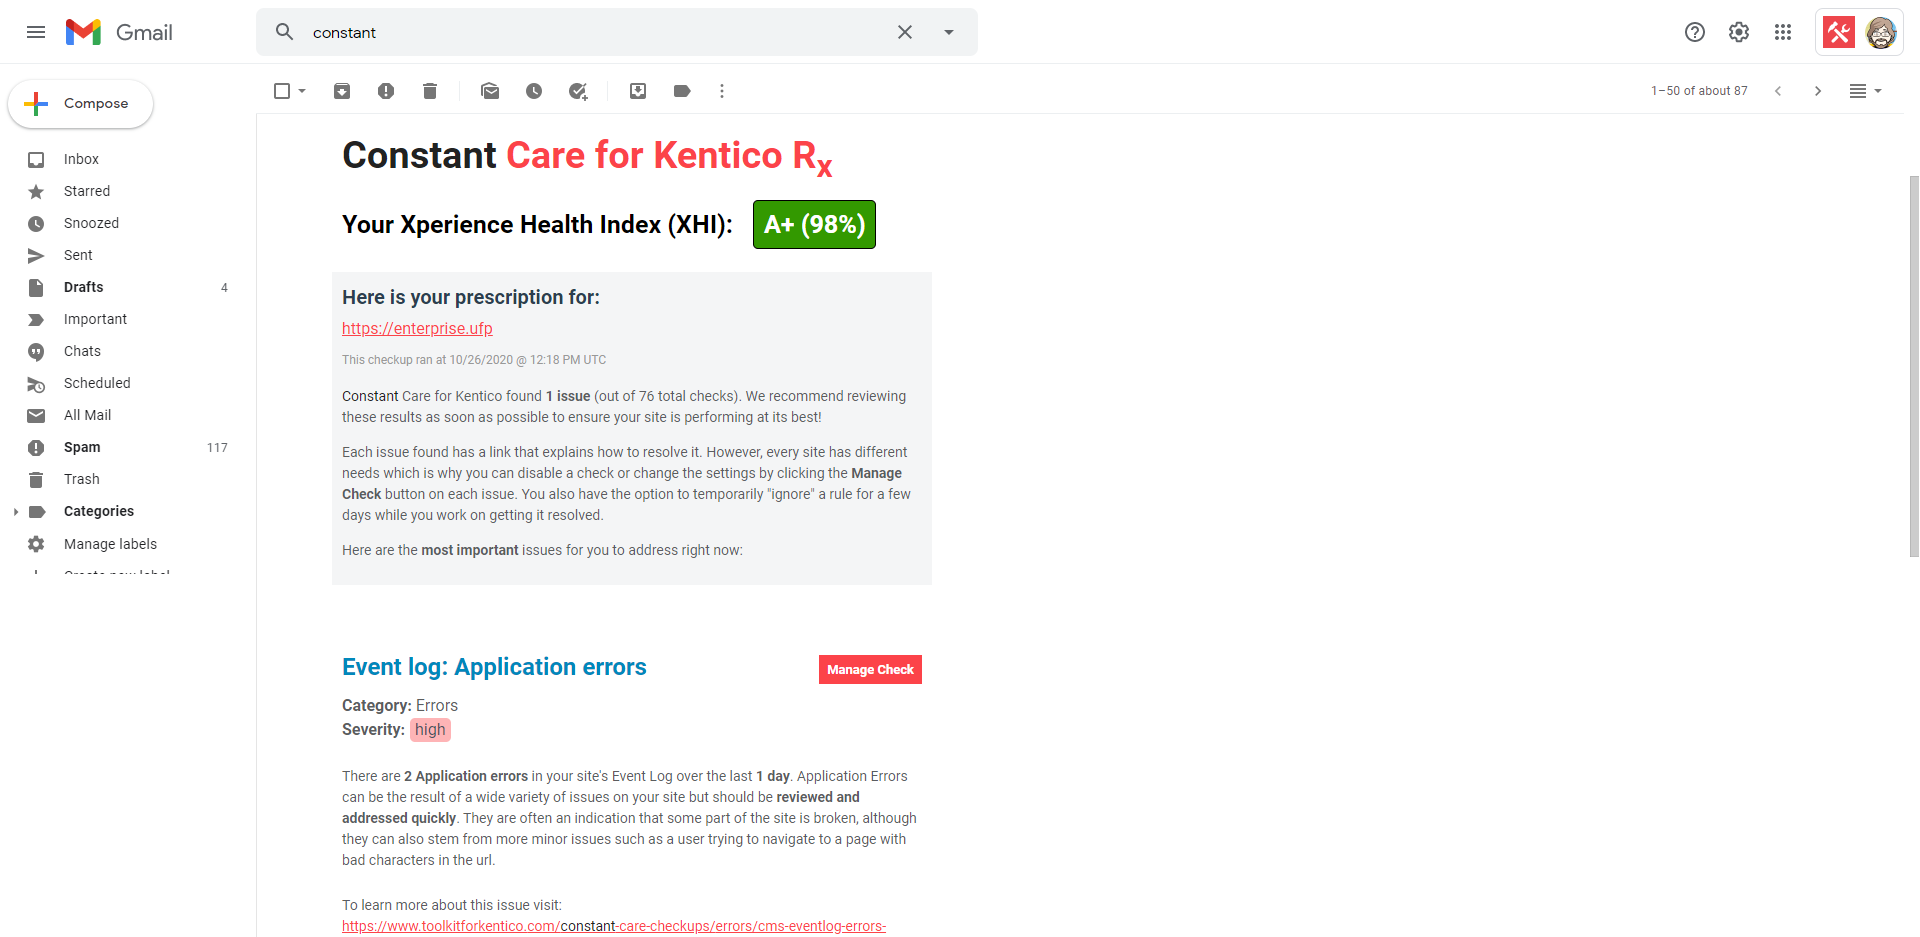 example of Constant Care for Kentico email report